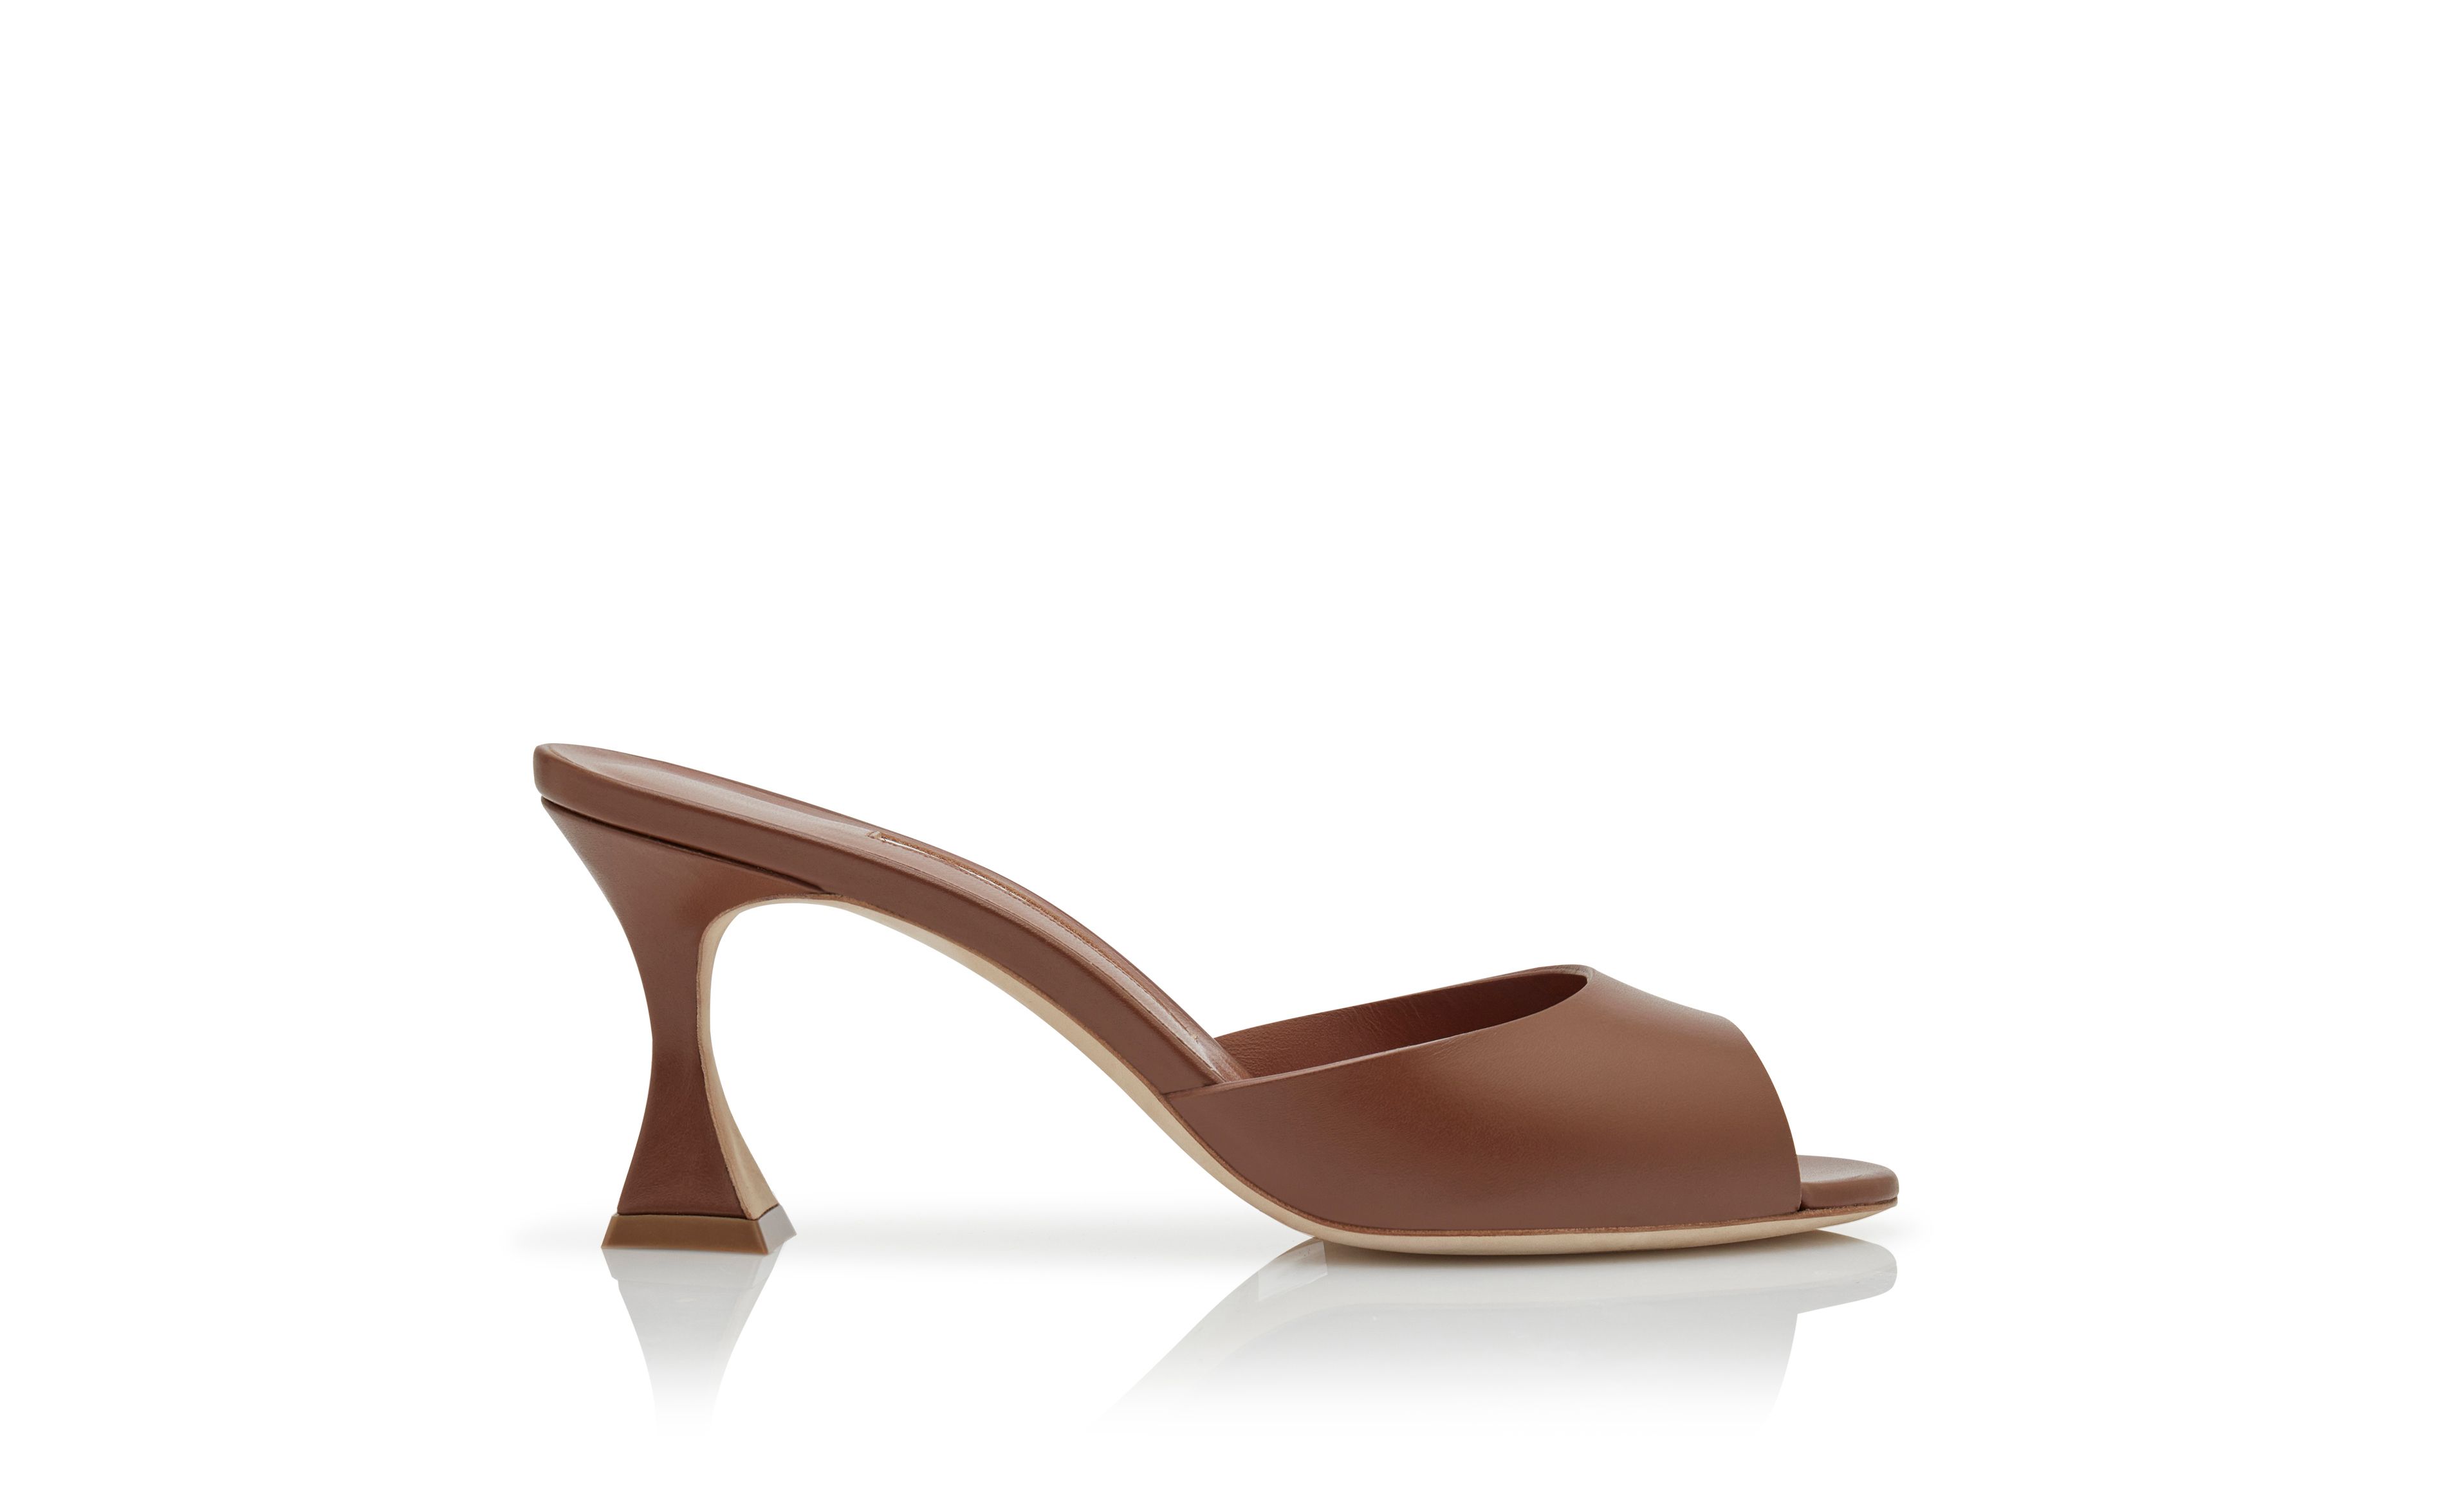 Designer Brown Calf Leather Mules - Image Side View